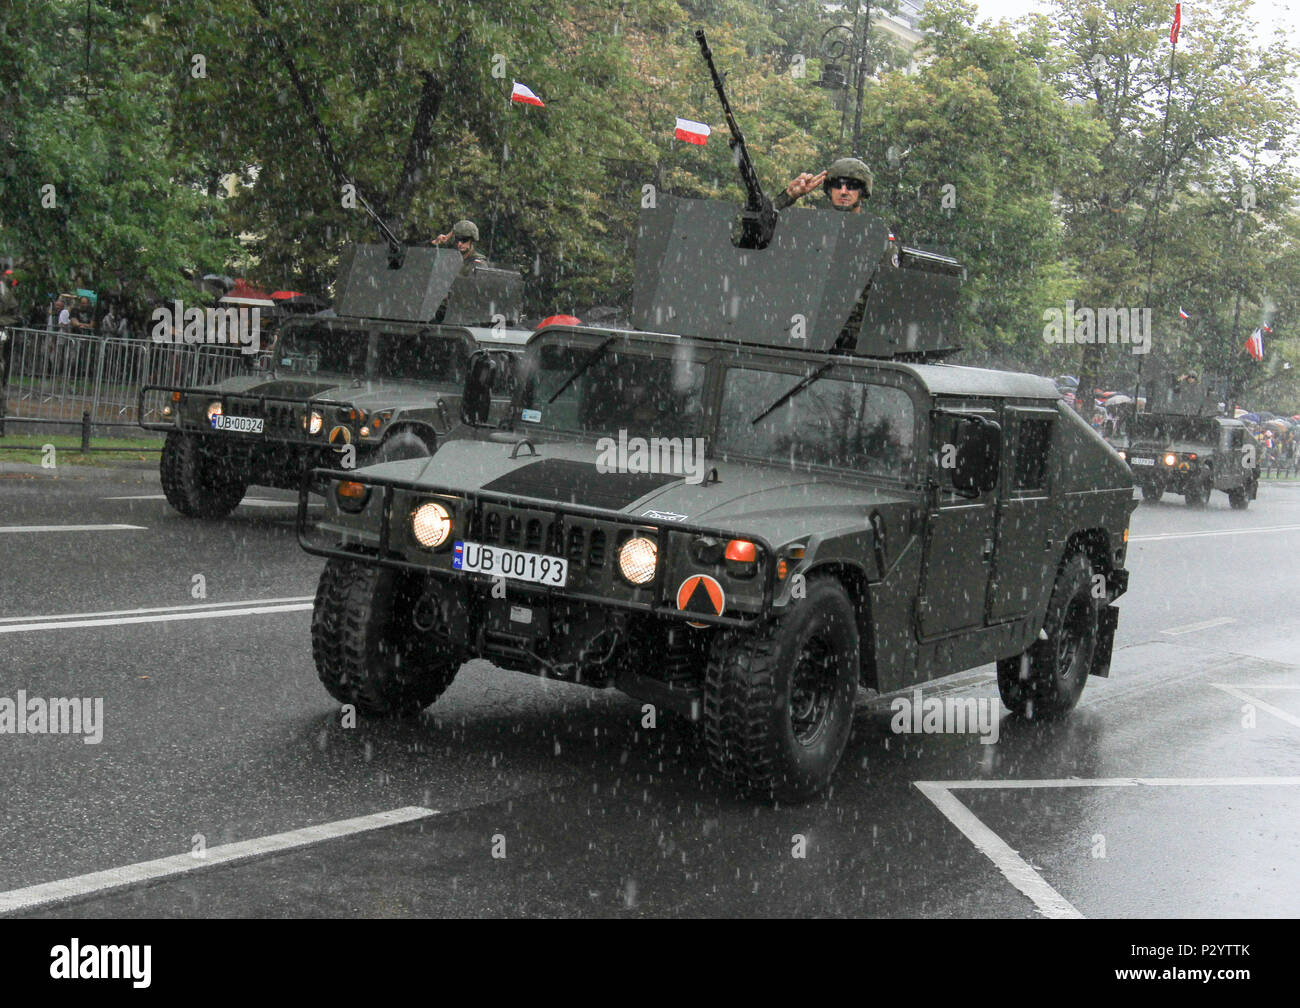 WARSAW, Poland – Polish soldiers salute from Humvees during the Armed Forces Day Parade in Warsaw, Poland, Aug. 15, 2016. The parade, held annually in the capital, commemorates the 96th anniversary of the Polish victory over Soviet Russia at the Battle of Warsaw in 1920 during the Polish-Soviet War. The event included participation from over one thousand Polish soldiers and soldiers from several allied countries including U.S. Soldiers of Company D, 3rd Combined Arms Battalion, 69th Armor Regiment, 3rd Infantry Division. (U.S. Army photo by Sgt. Lauren Harrah/Released) Stock Photo